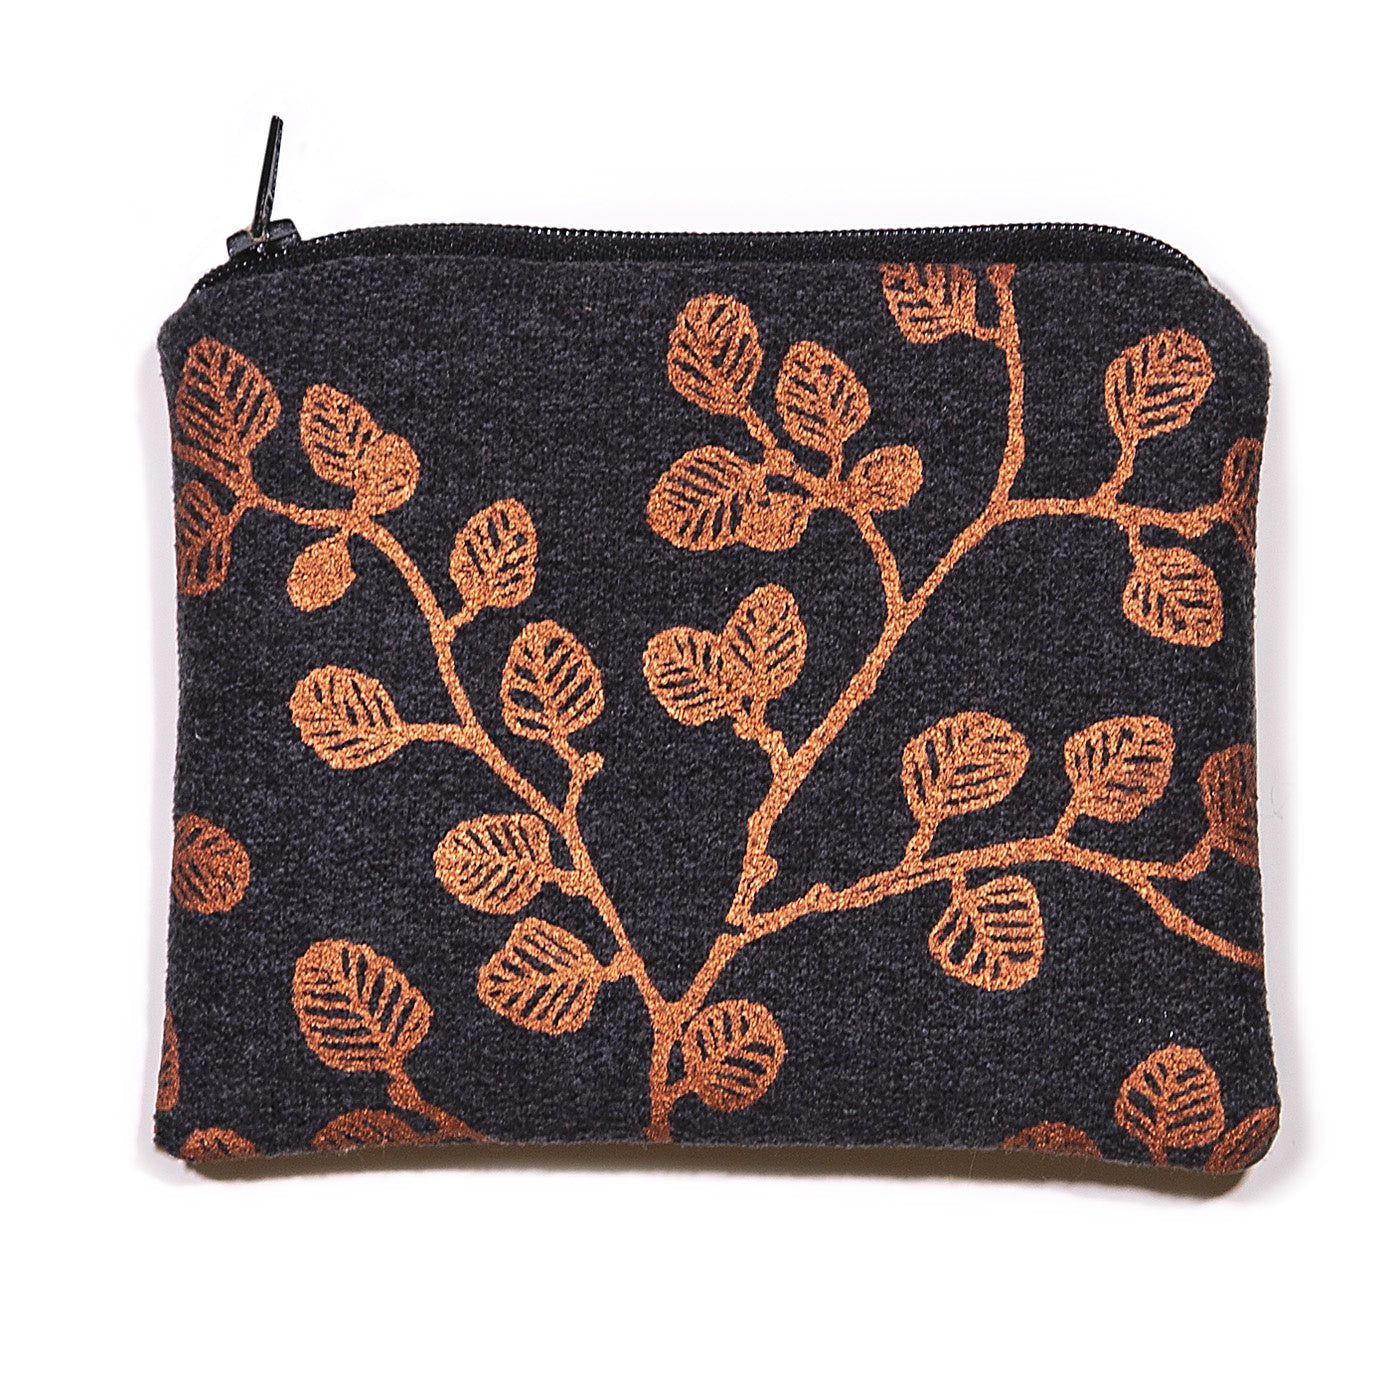 Stalley Textile Co - Zip Purse - Small - Fagus - Copper on Charcoal